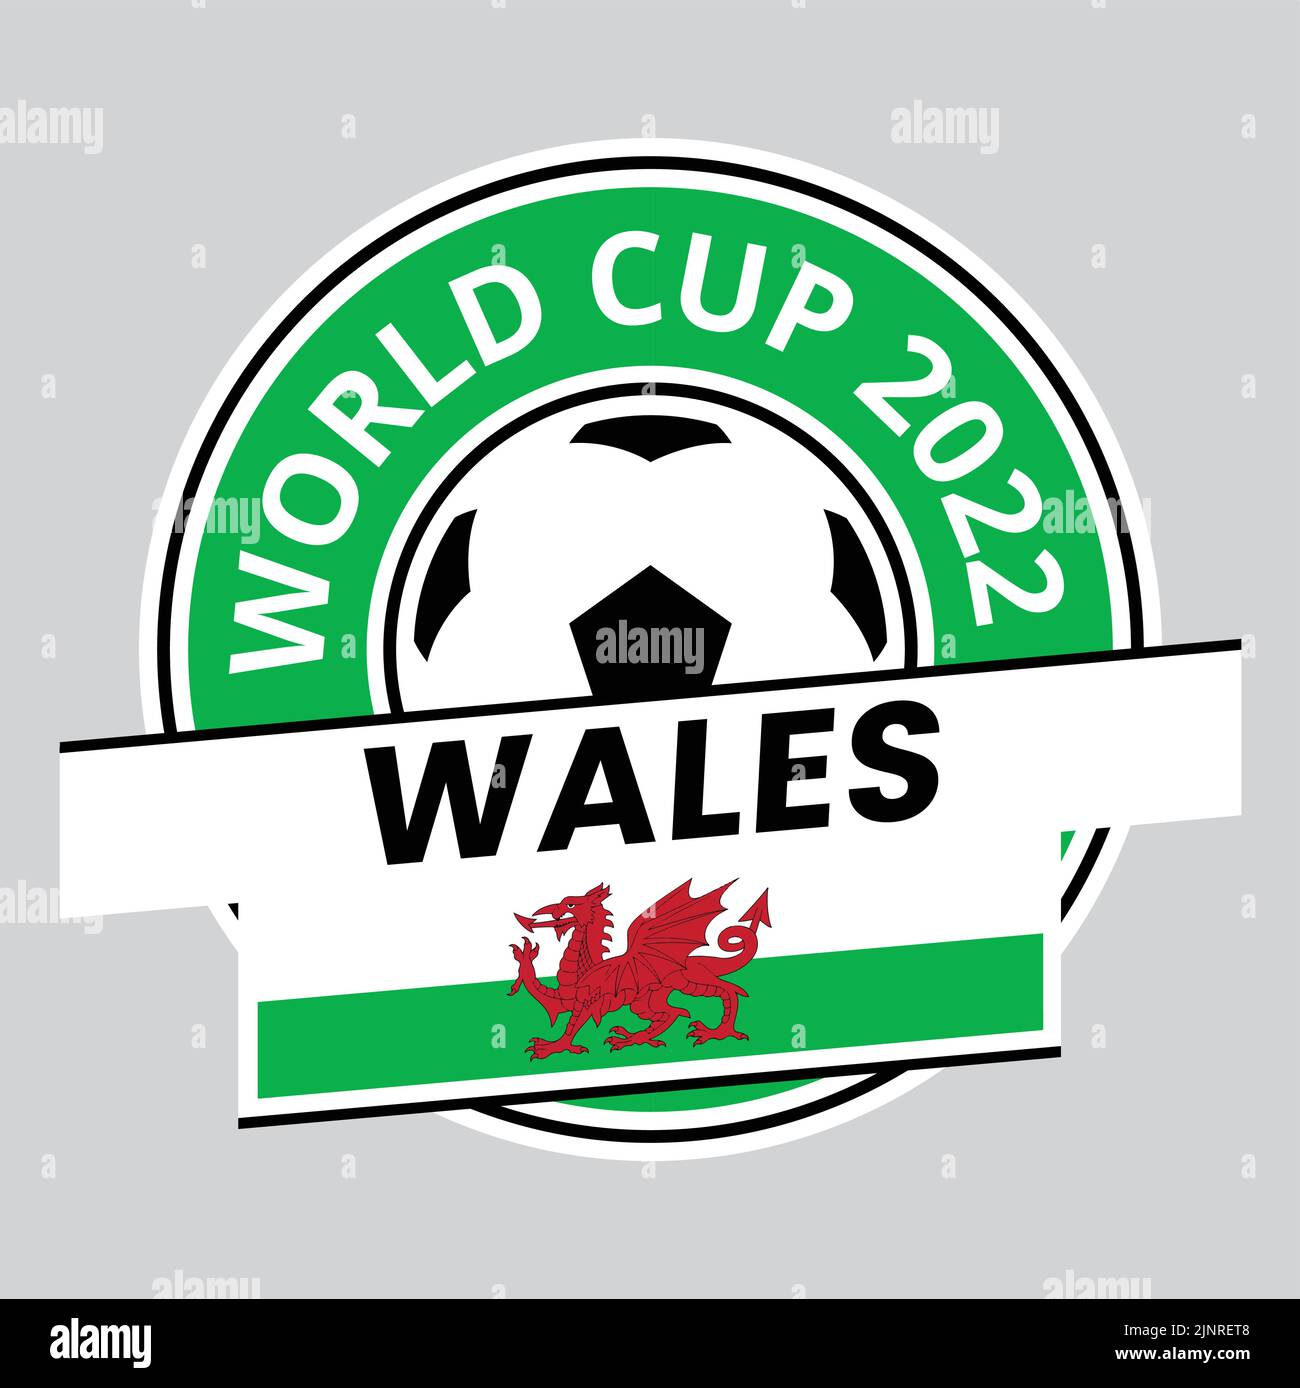 Illustration of Wales Team Badge for Qatar World Cup 2022 Stock Vector